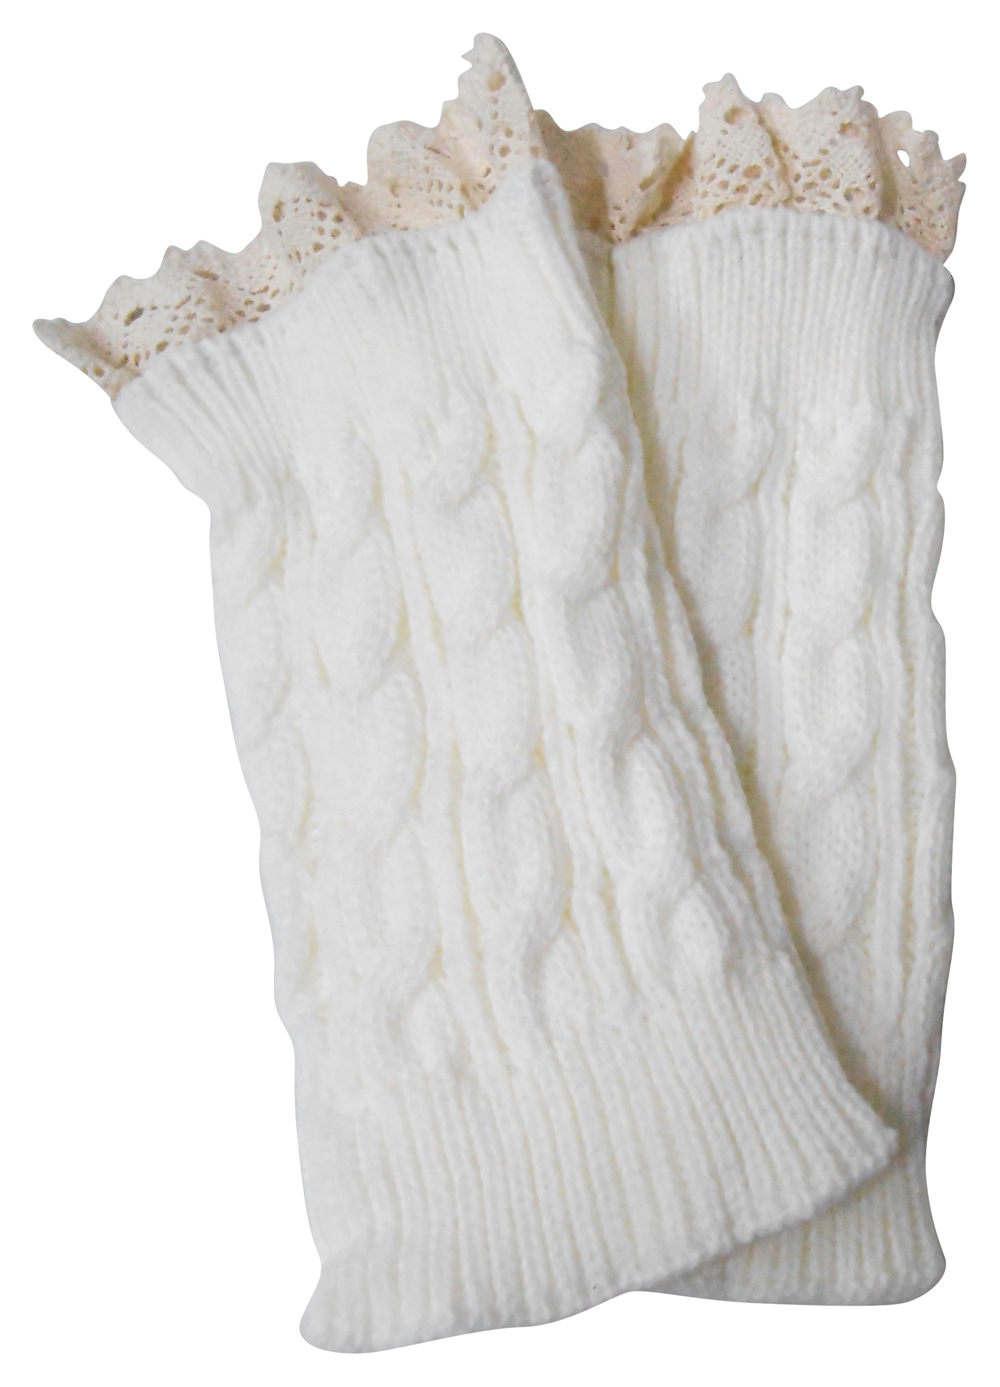 Cable Knit Boot Cuff with Lace Top - IVORY - CLOSEOUT